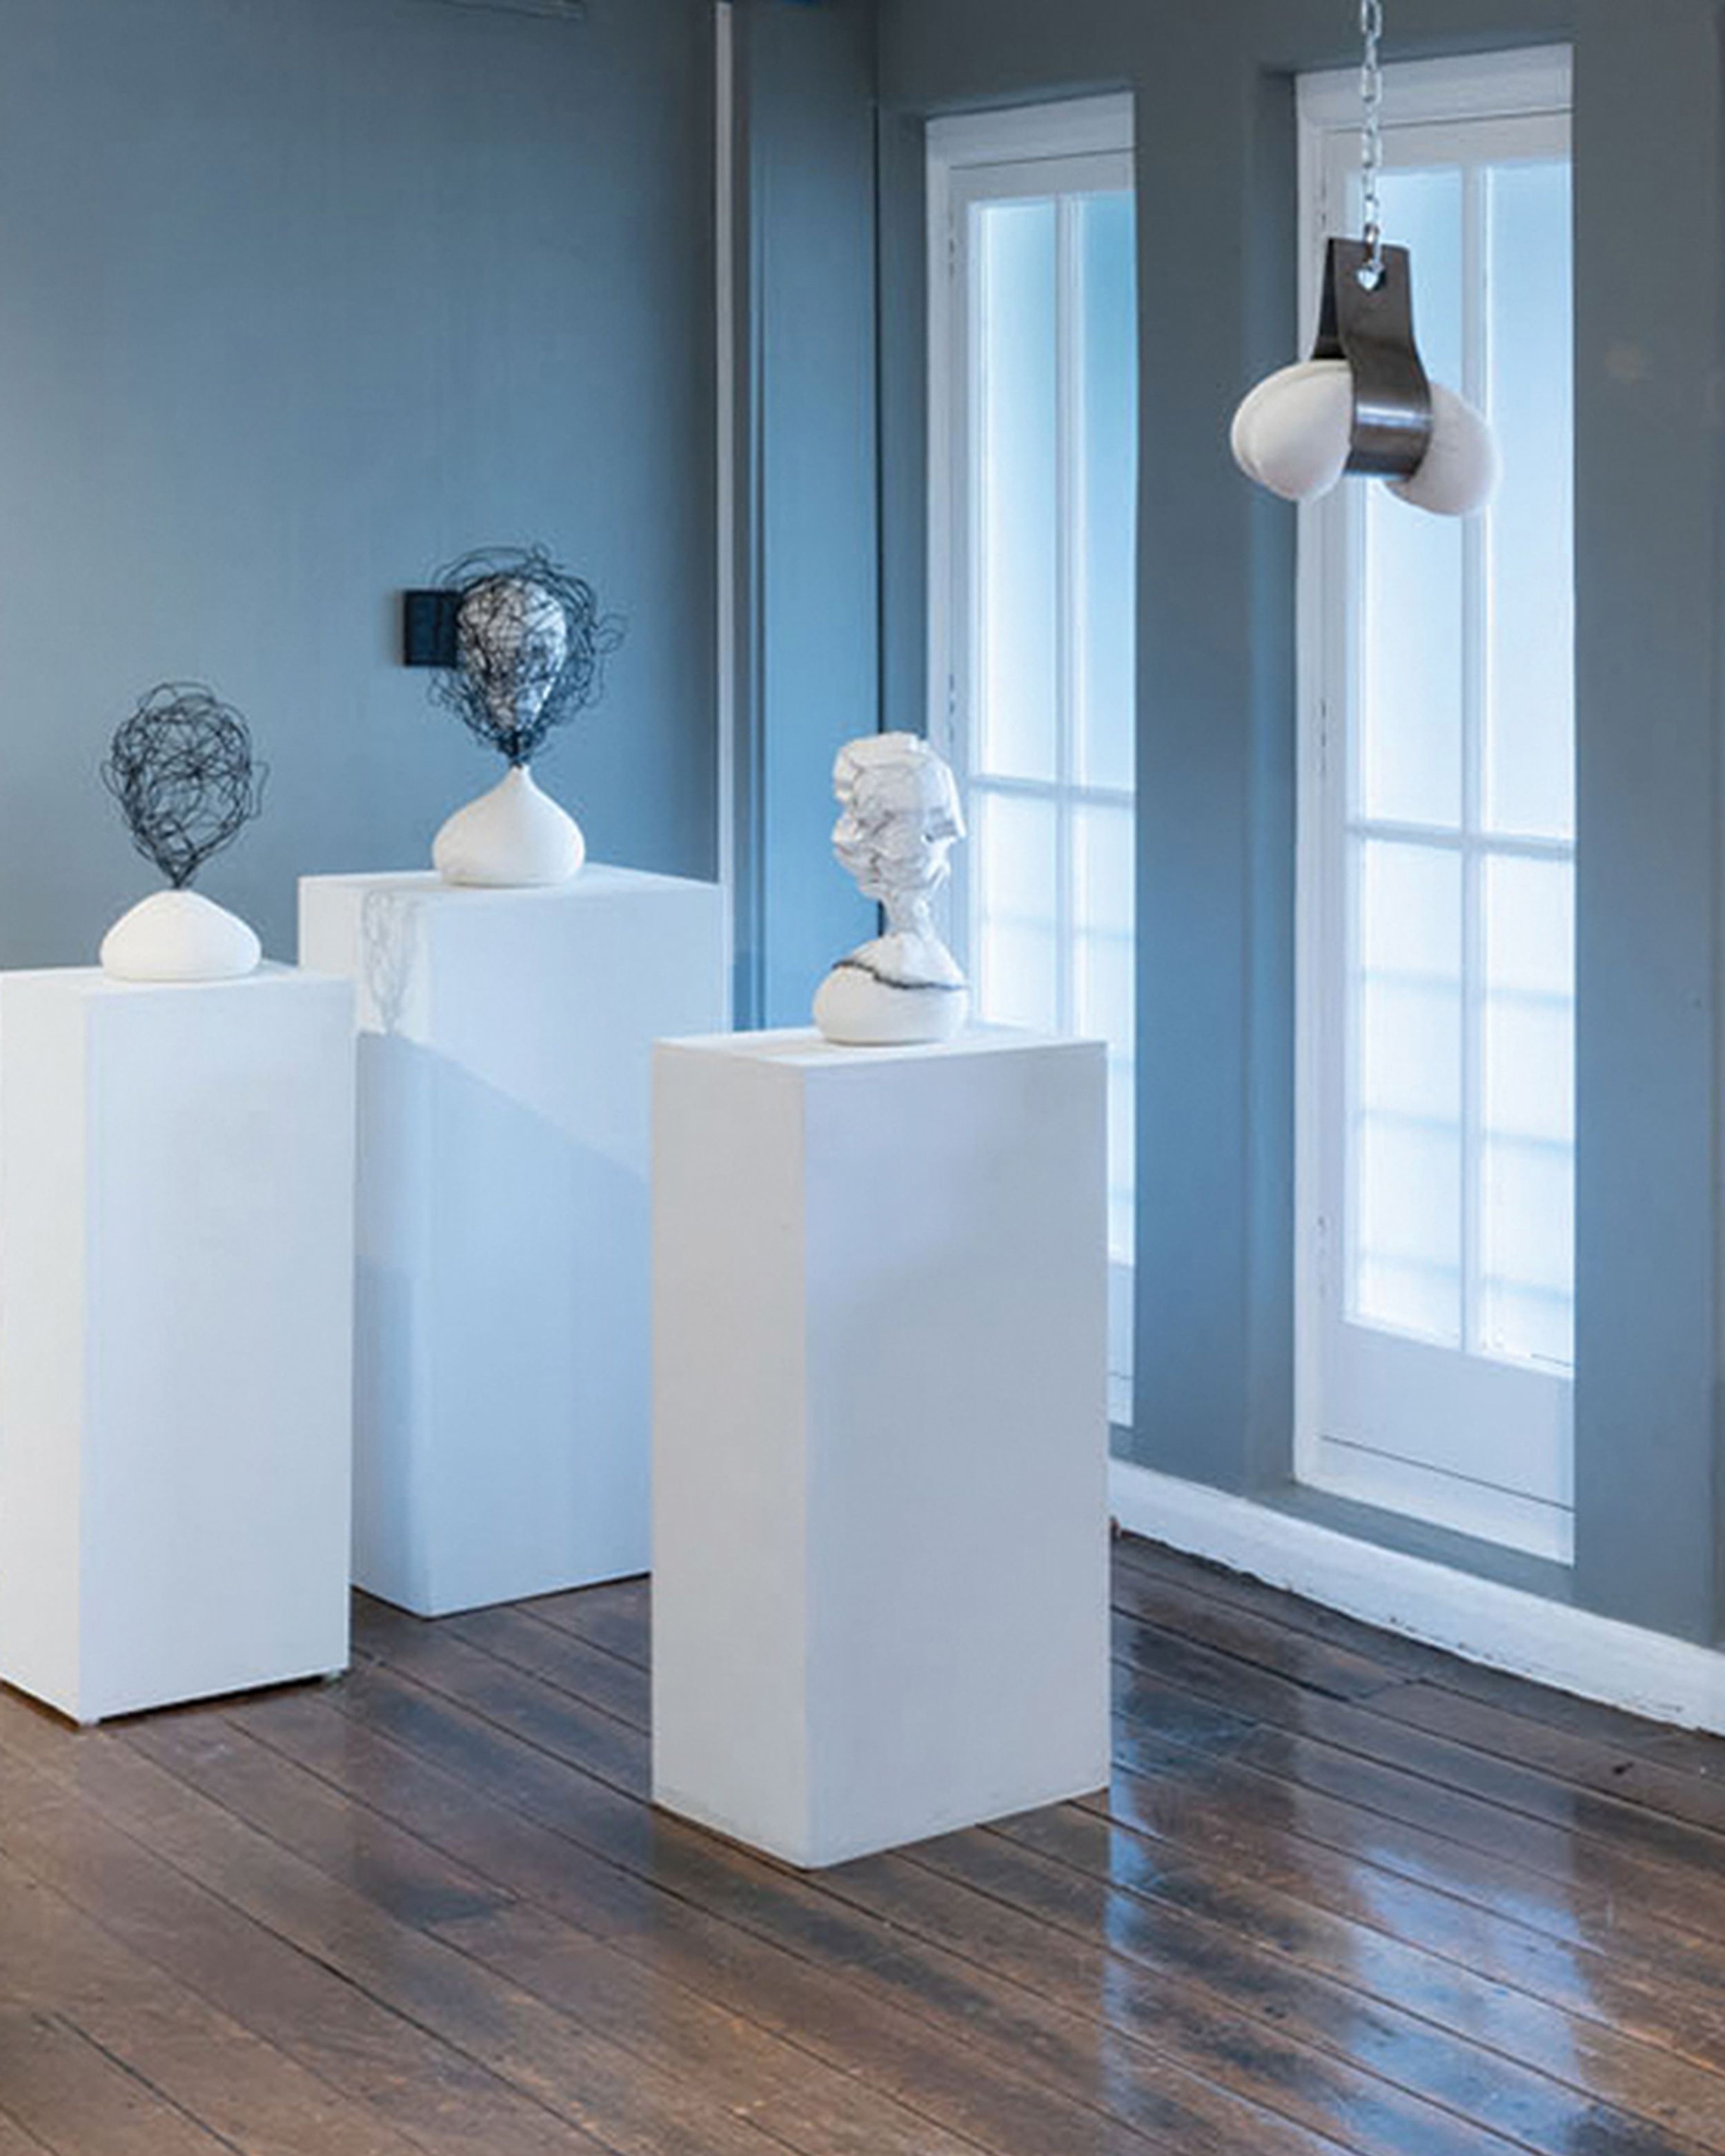 Gallery room featuring three stands with modern sculptures